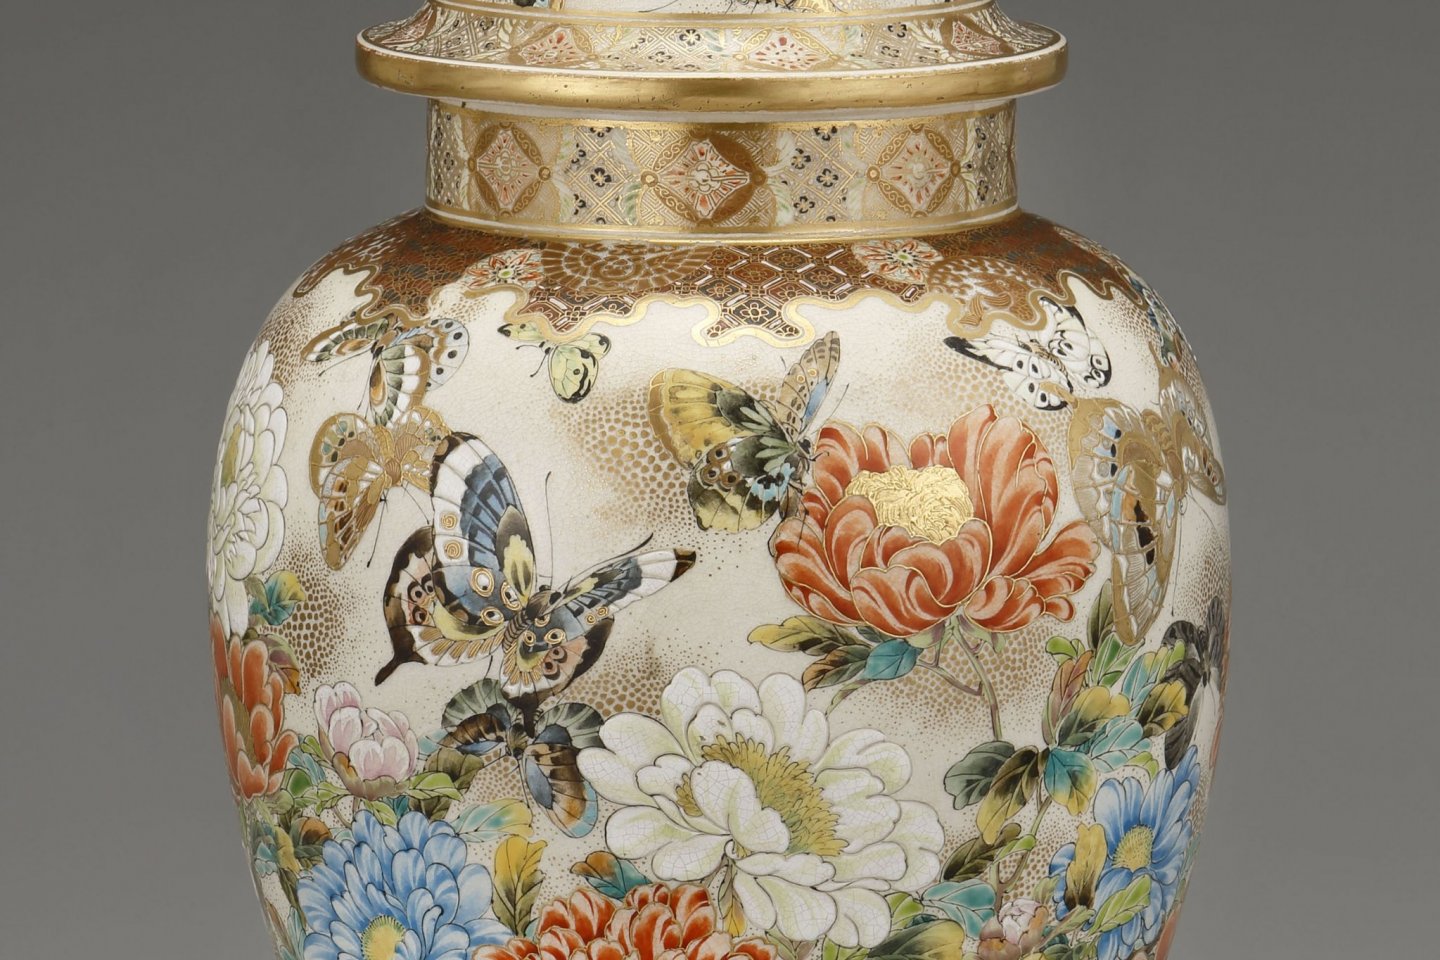 The event will feature a range of pottery pieces from the Meiji and Taisho eras